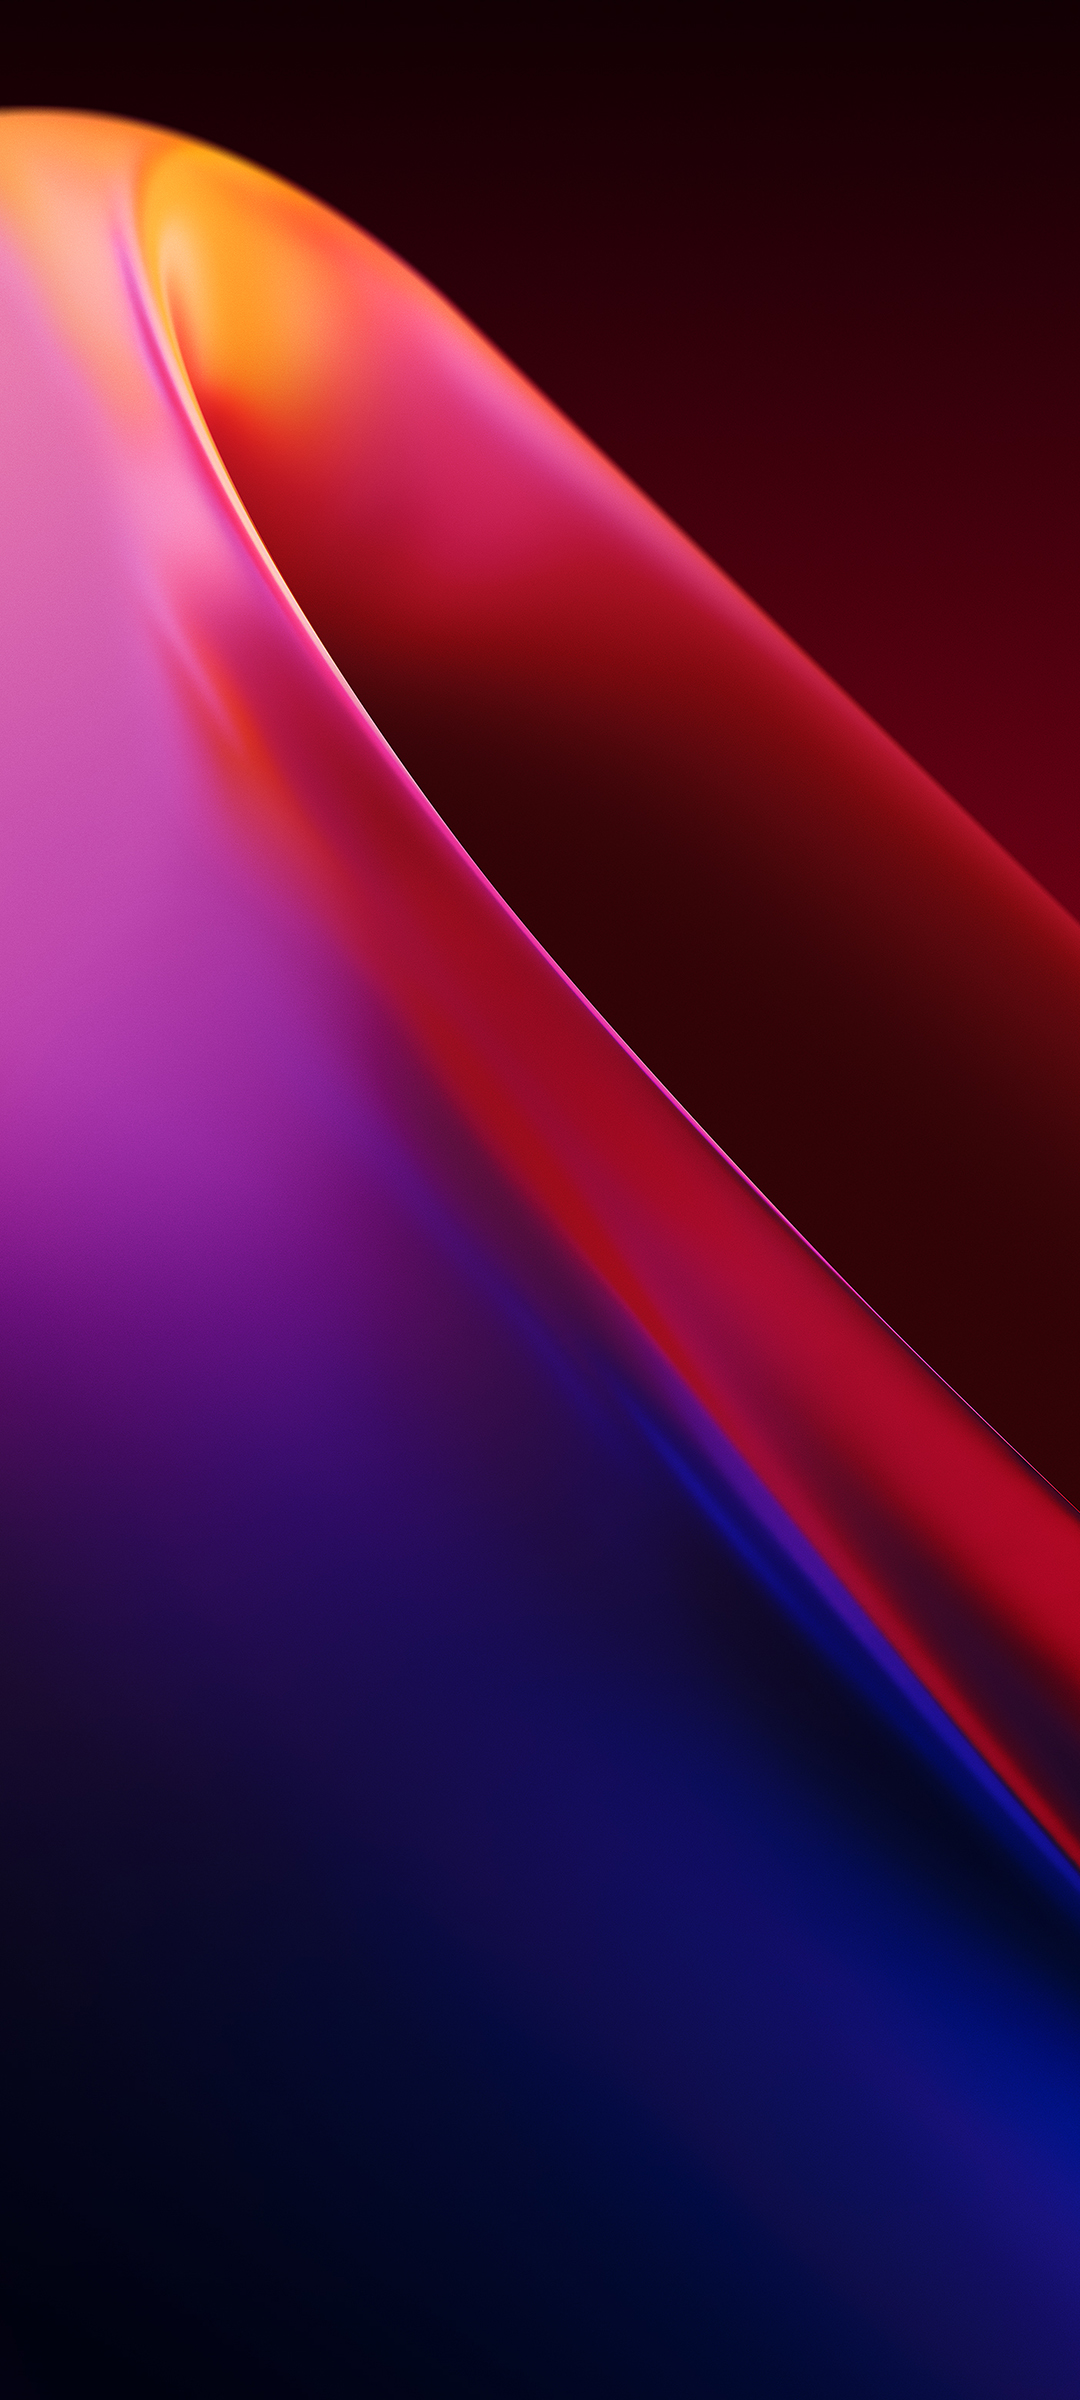 Get the official OnePlus Nord wallpapers here Download - 9to5Google